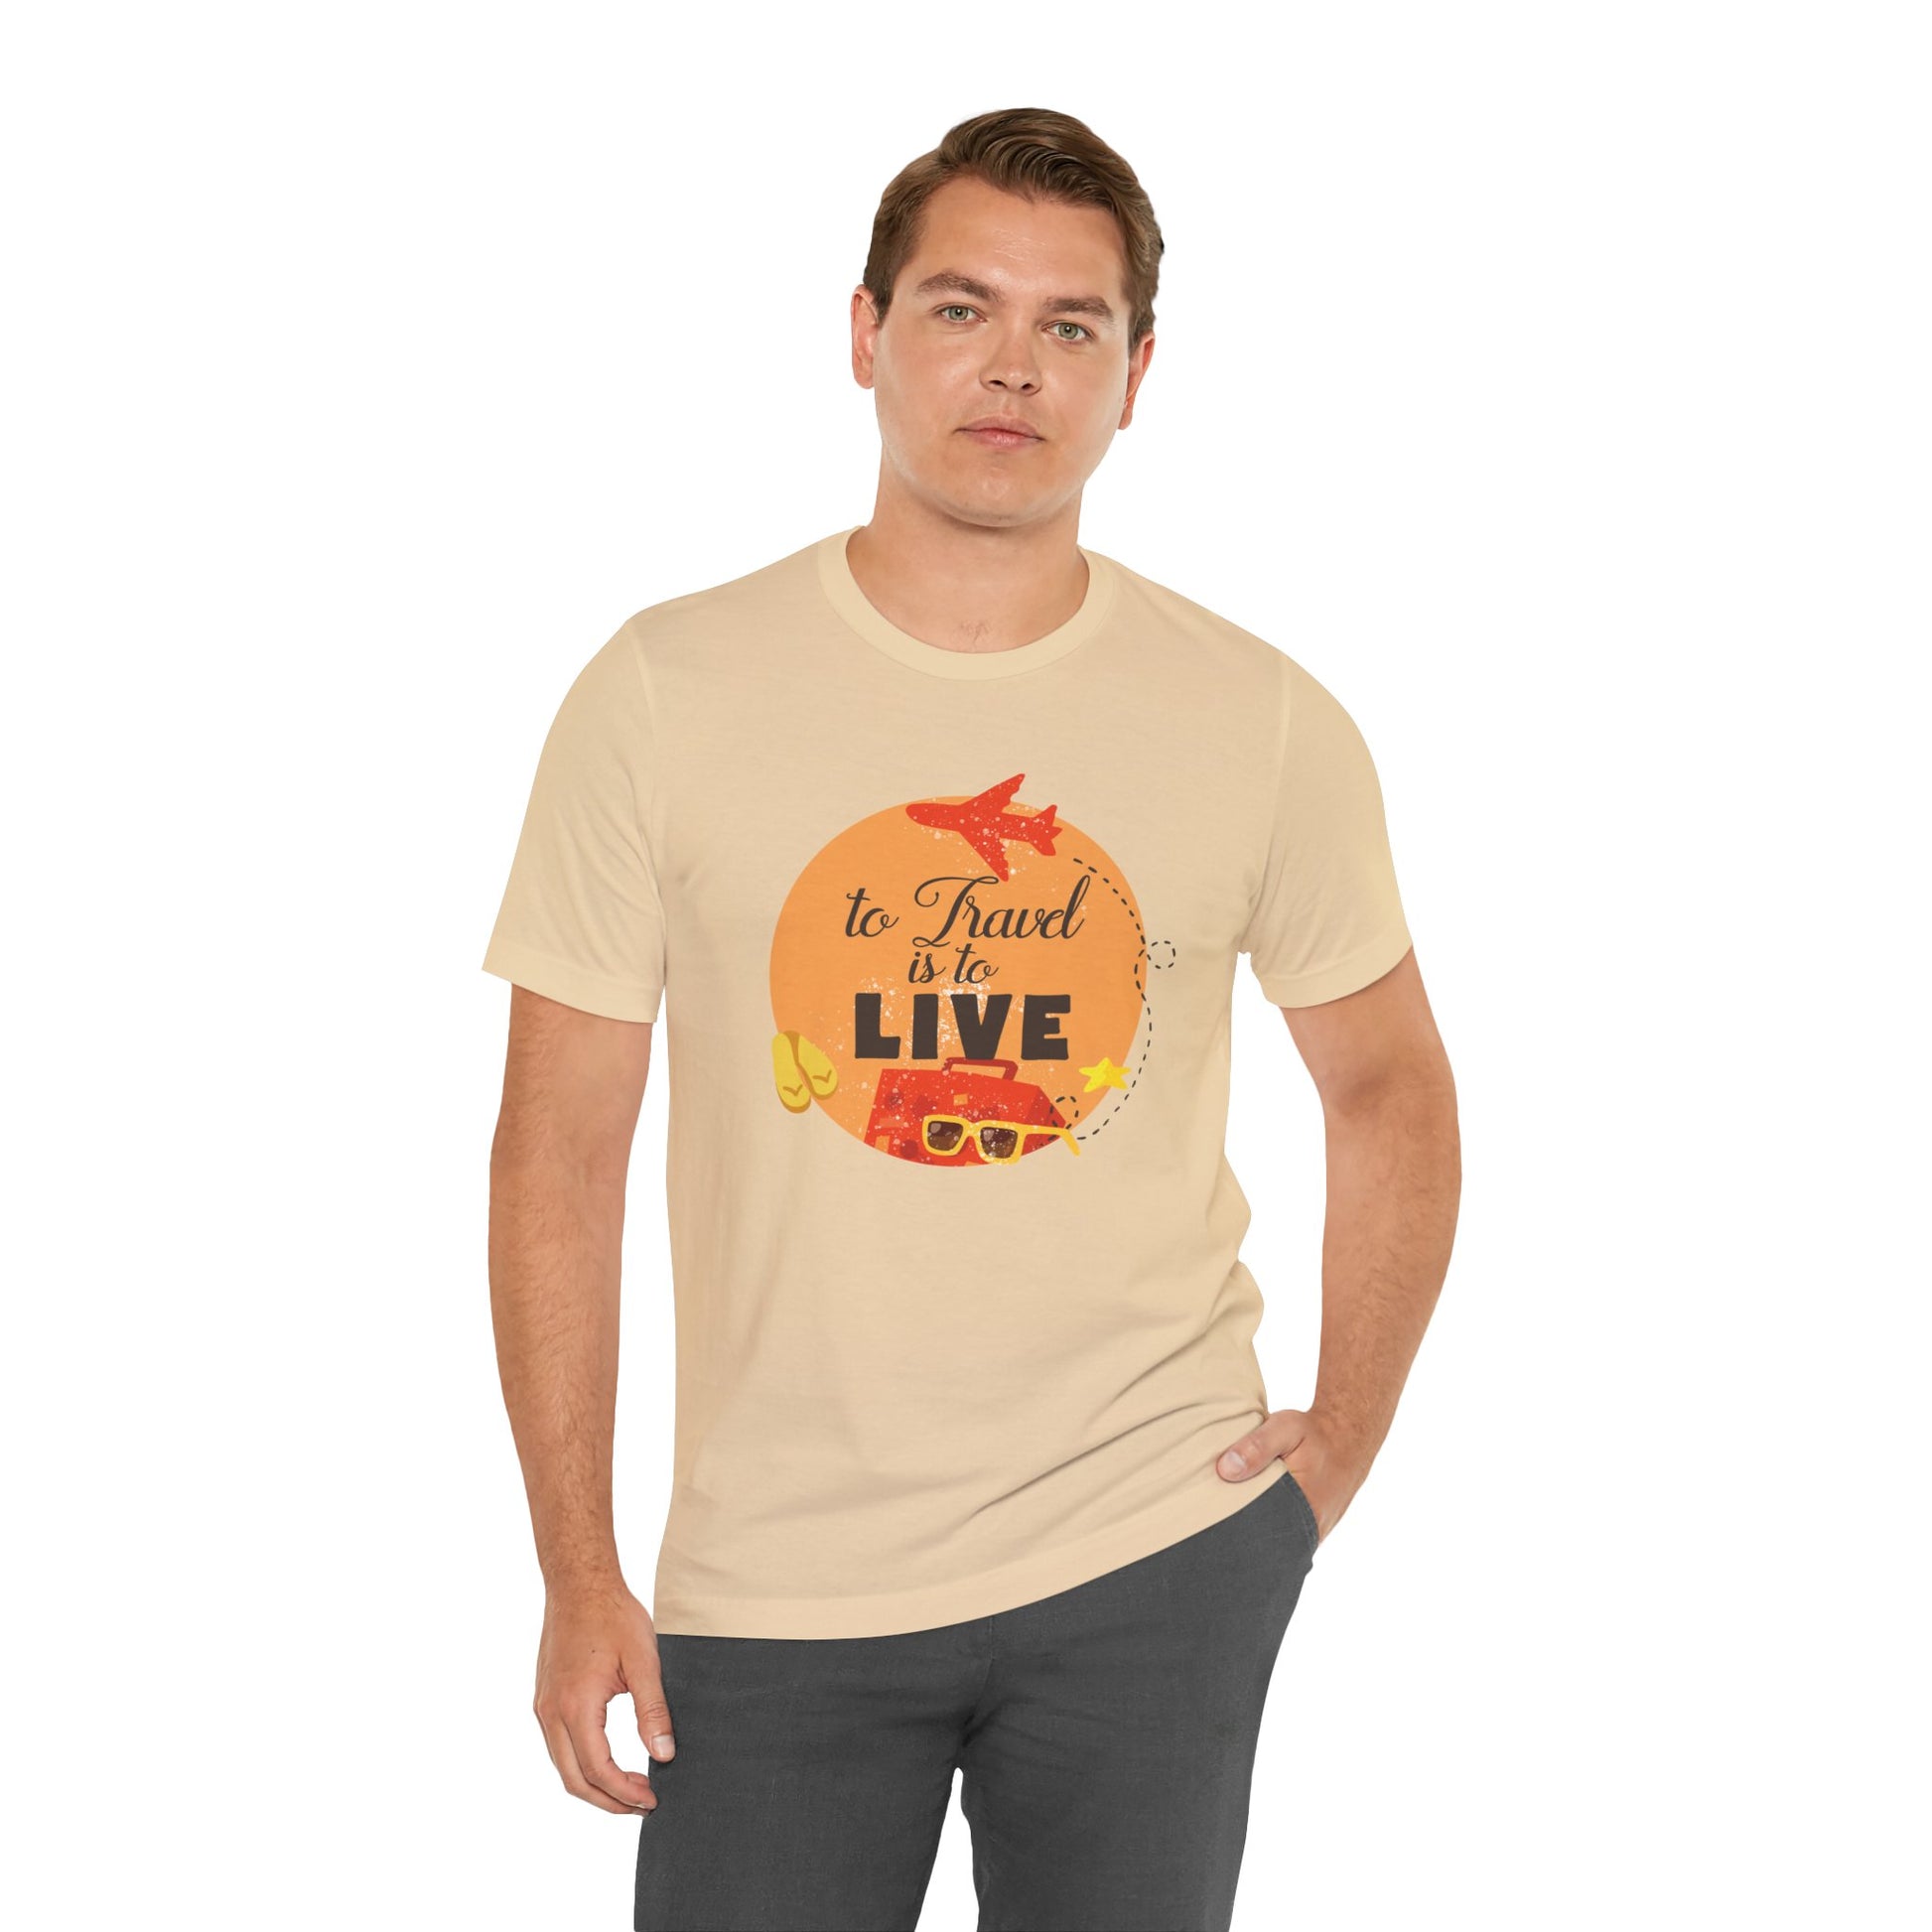 To Travel is to Live Motivational Quote Short Sleeve T-Shirt - Unisex - Motivational Treats